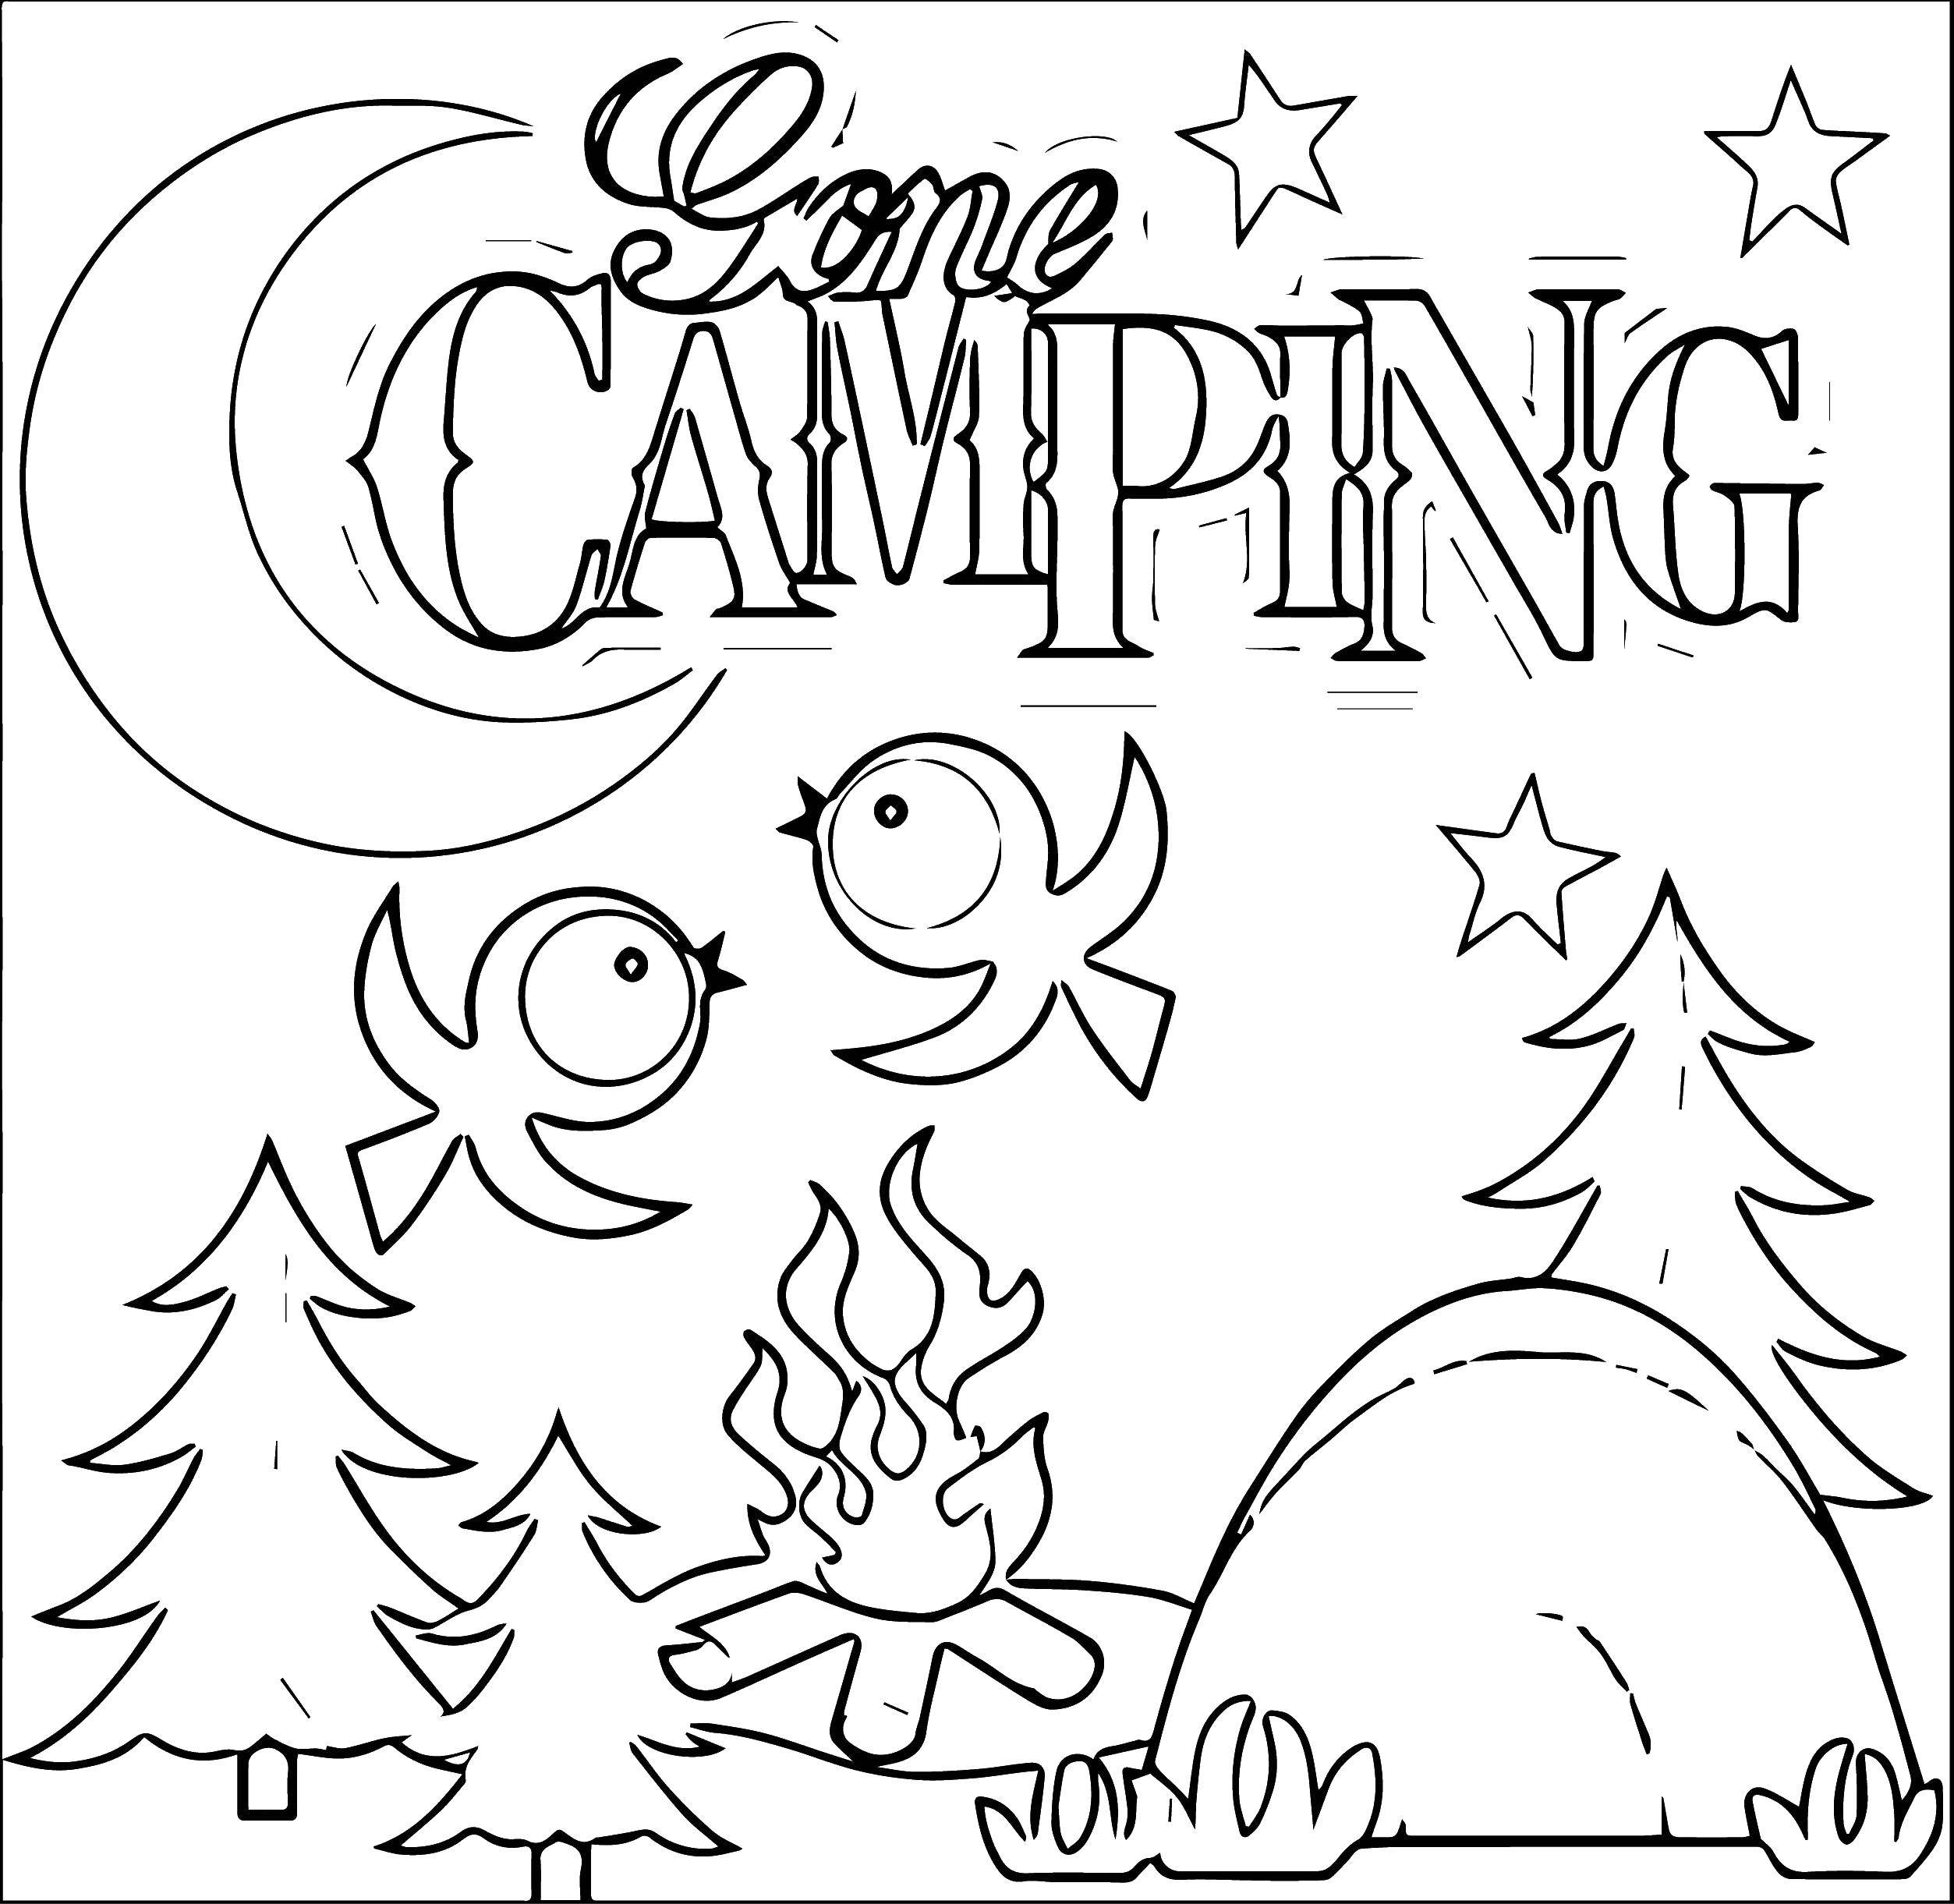 Coloring Tent and poultry. Category Camping. Tags:  tent, trees, fire, birds.